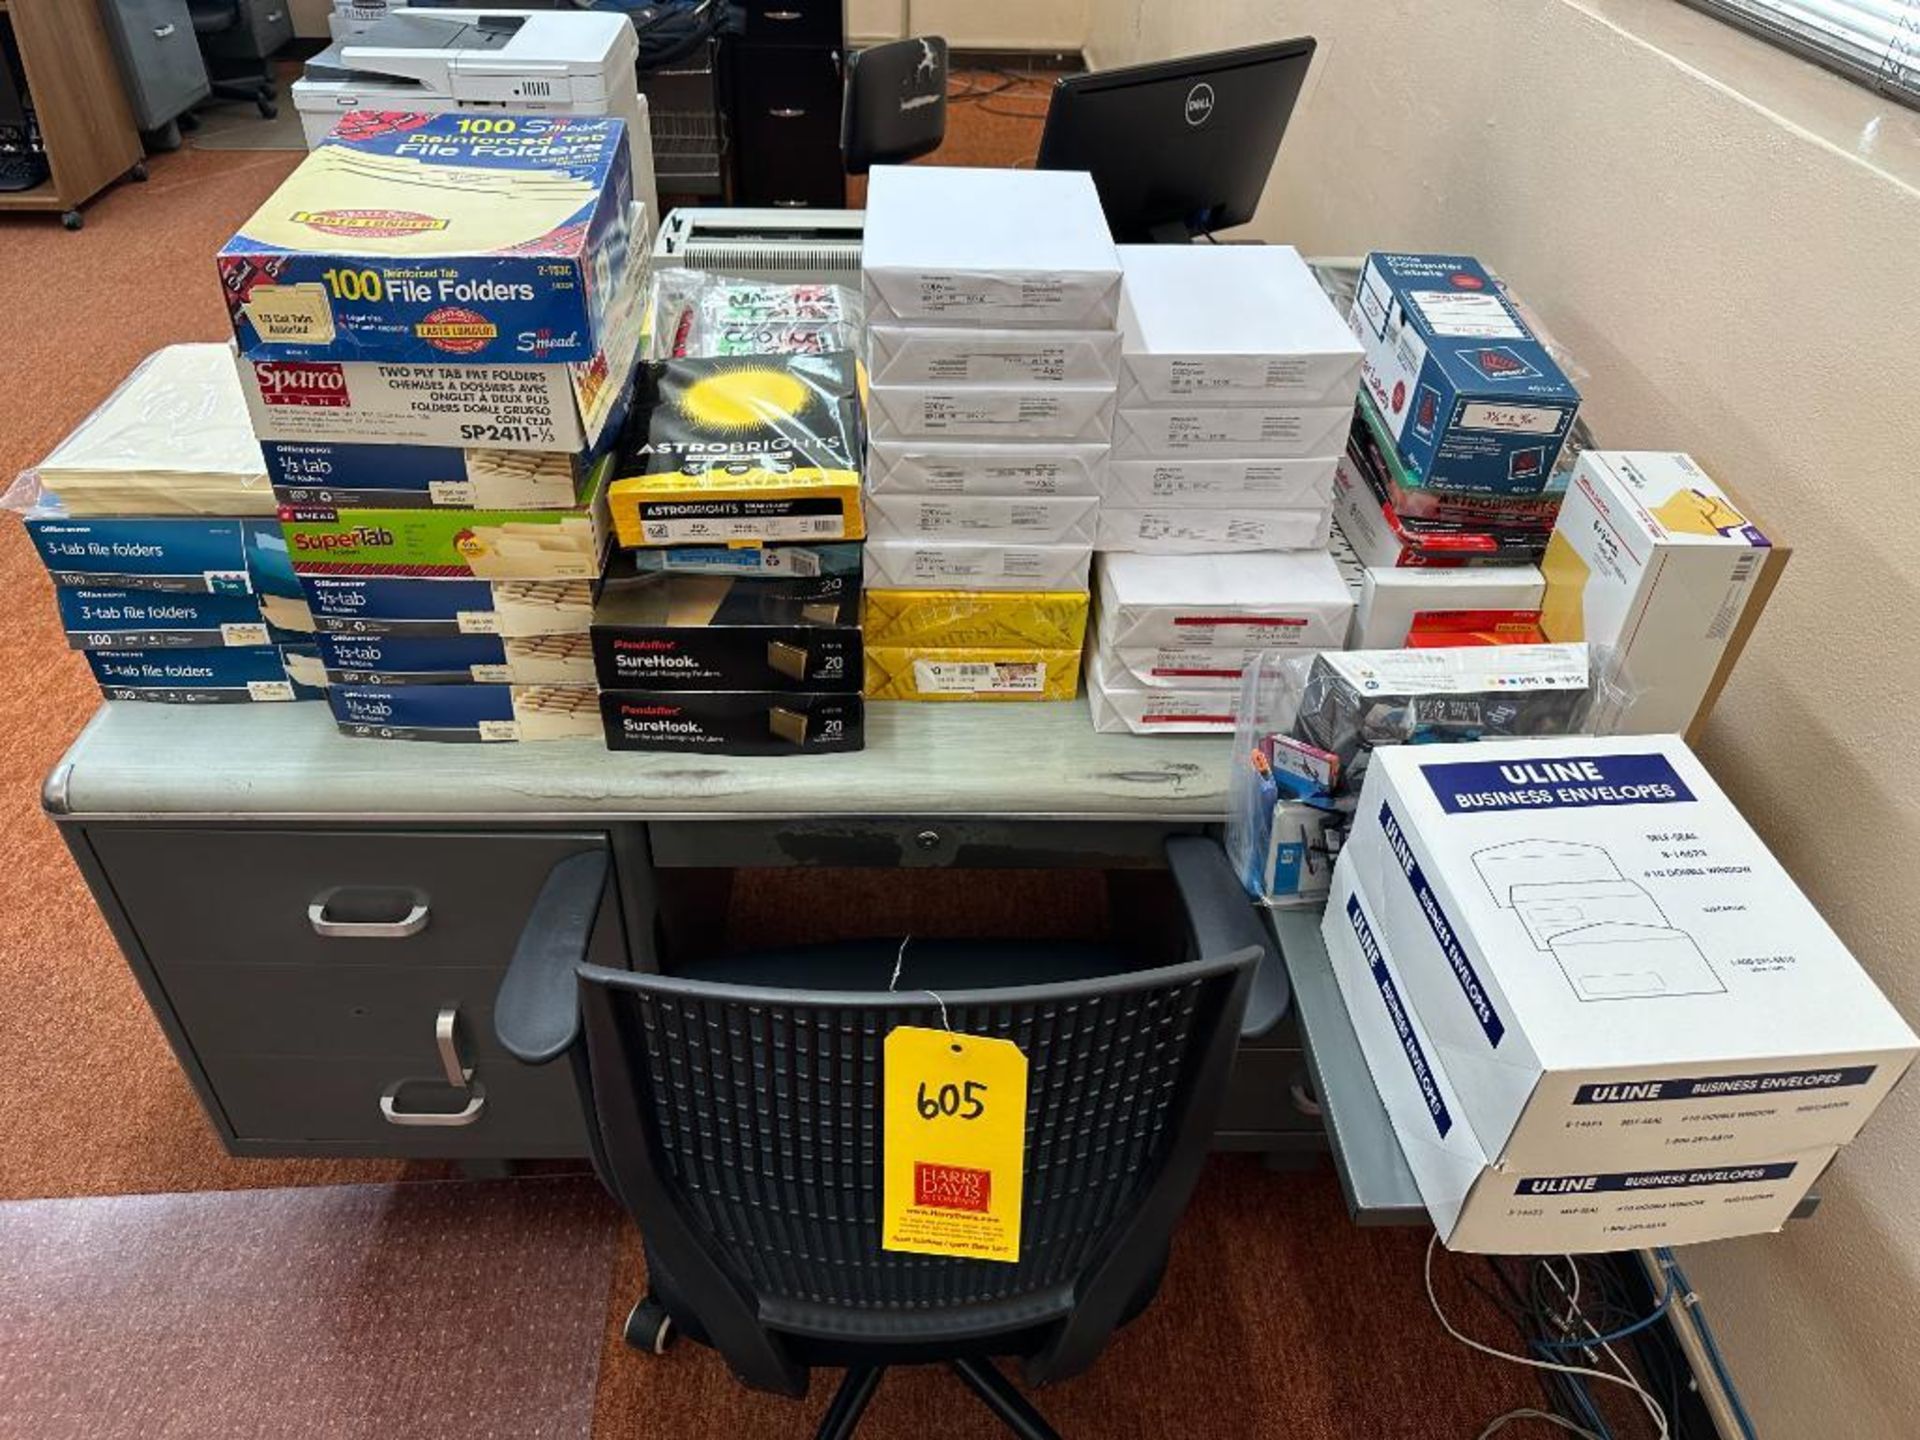 Desk, Chair, Assorted Paper Products and Folders - Rigging Fee: $150